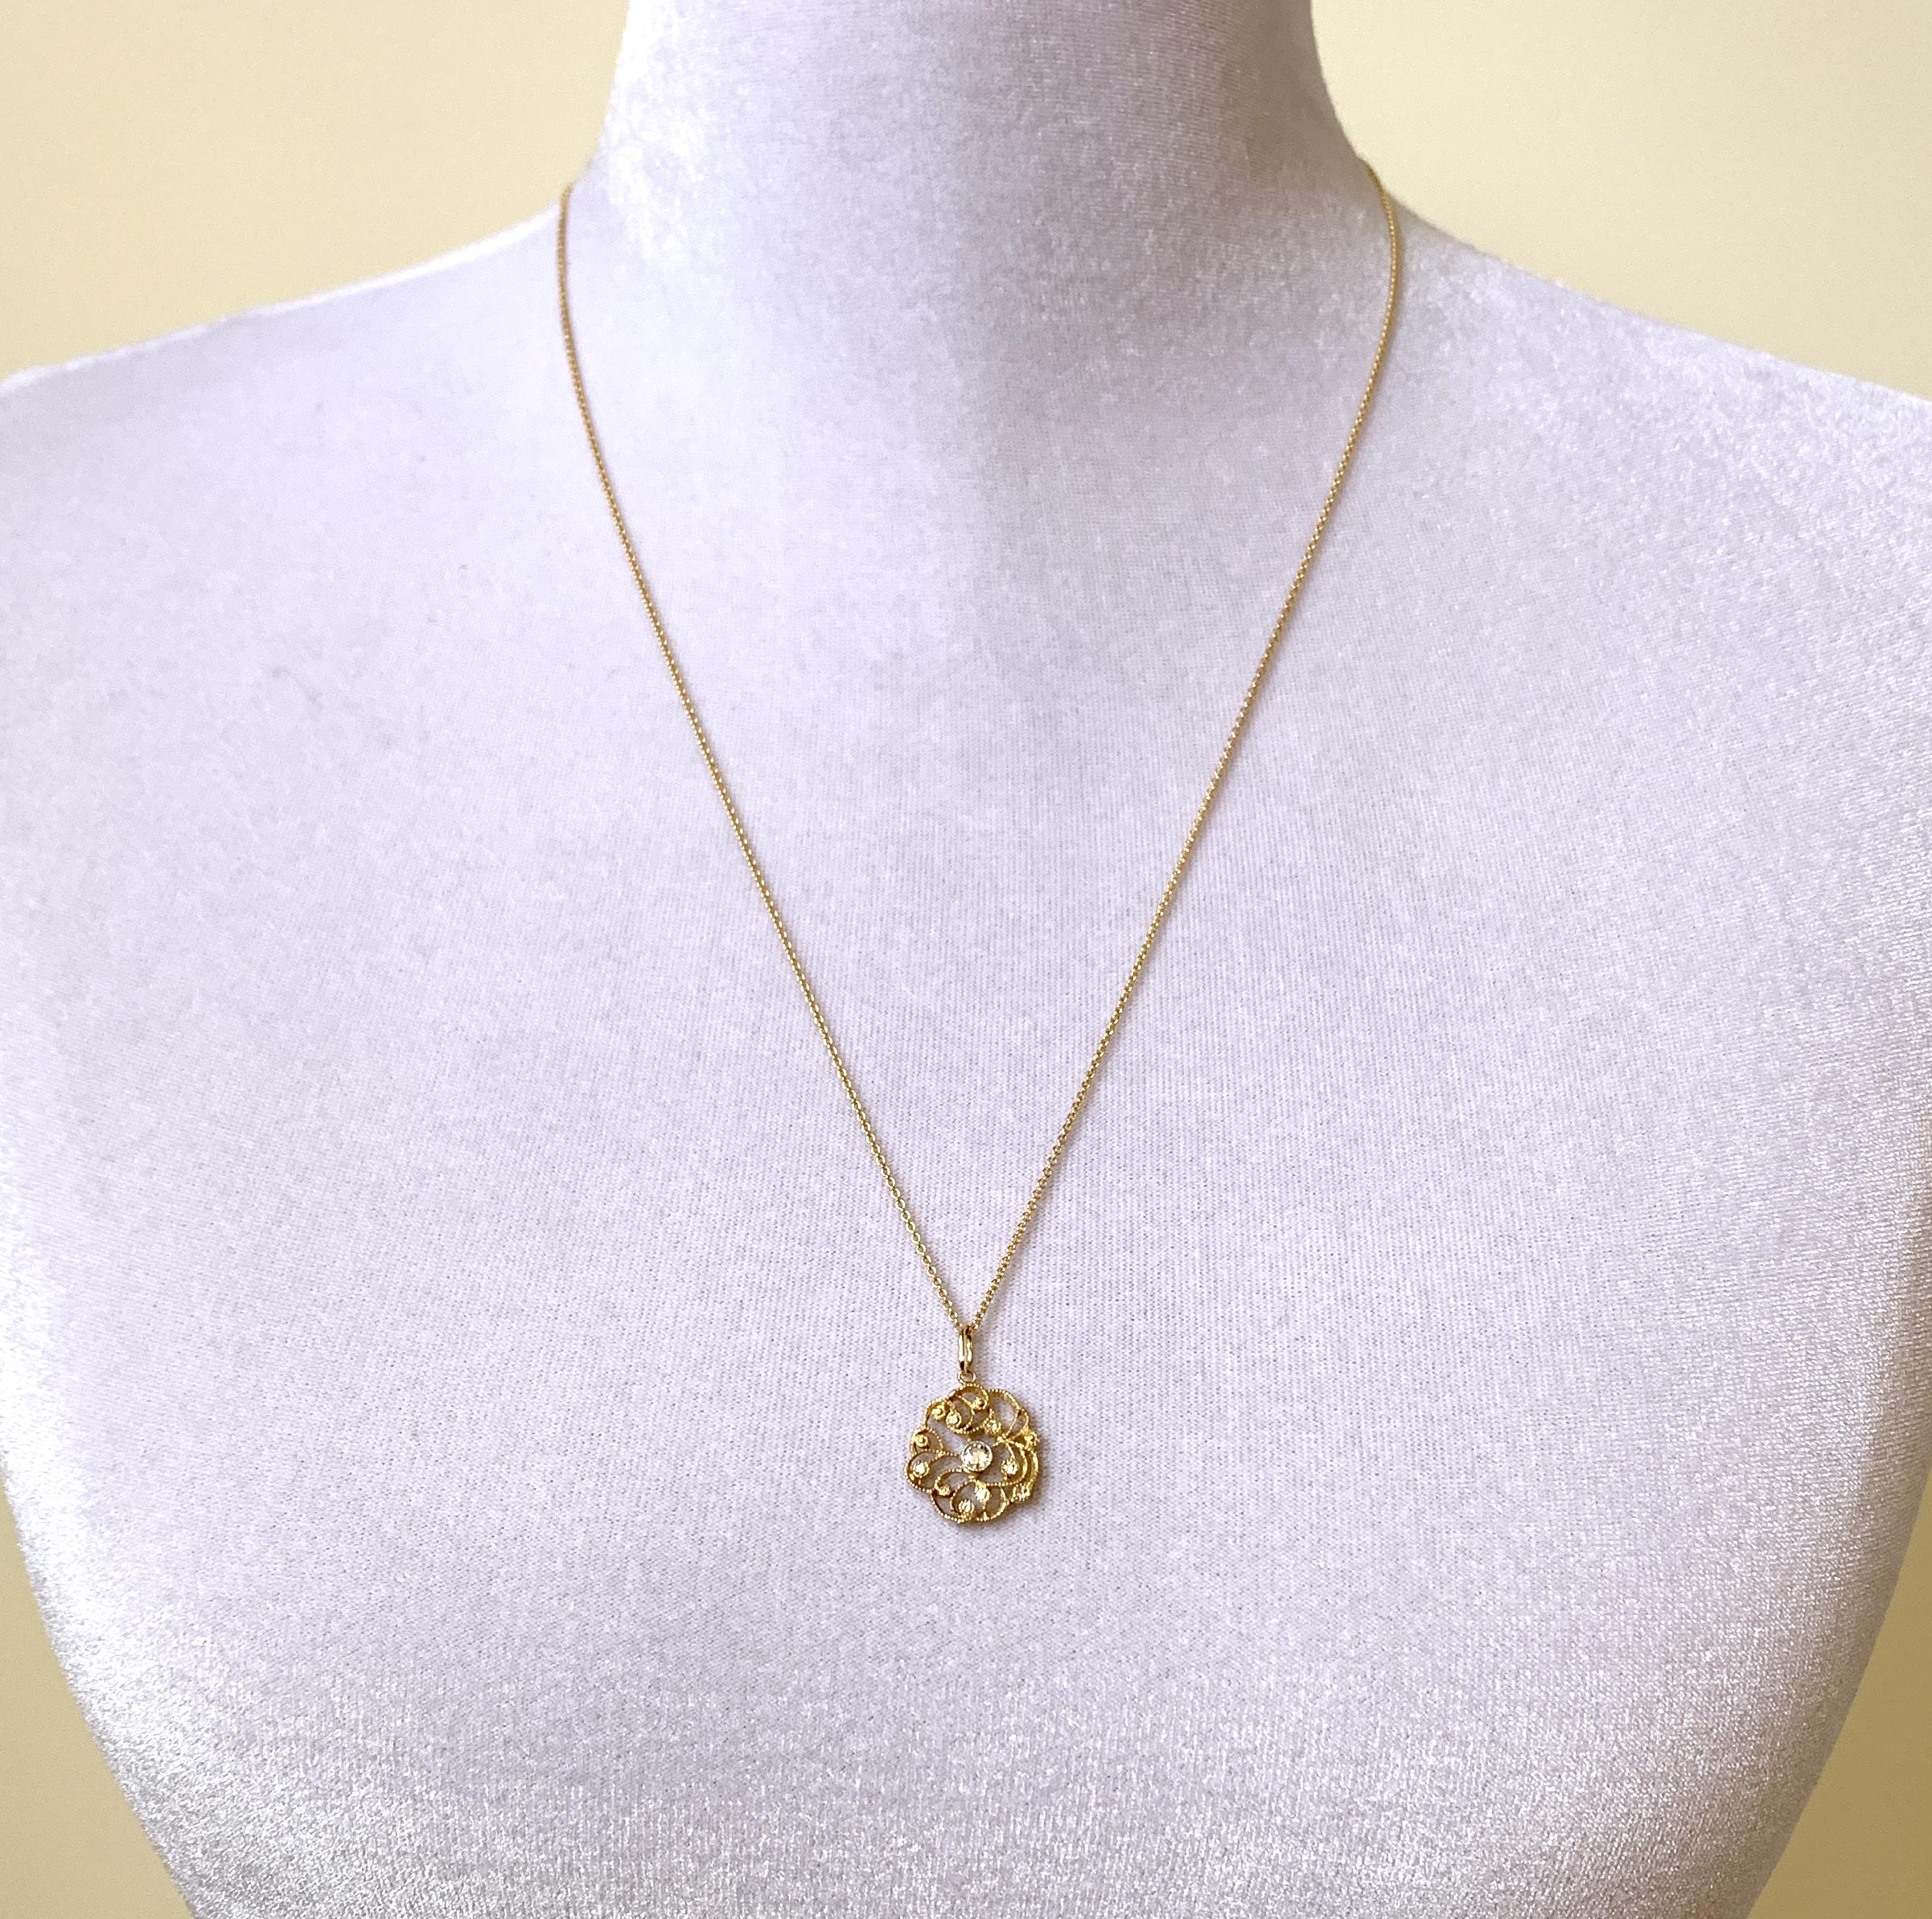 This original design by Eytan Brandes is one of his evergreens.  He's used this lacy floral (but not precious or fussy) rondelle as a pendant, as a chain link, and as earrings.  

This latest version is in rich, vivid 18 karat yellow gold,